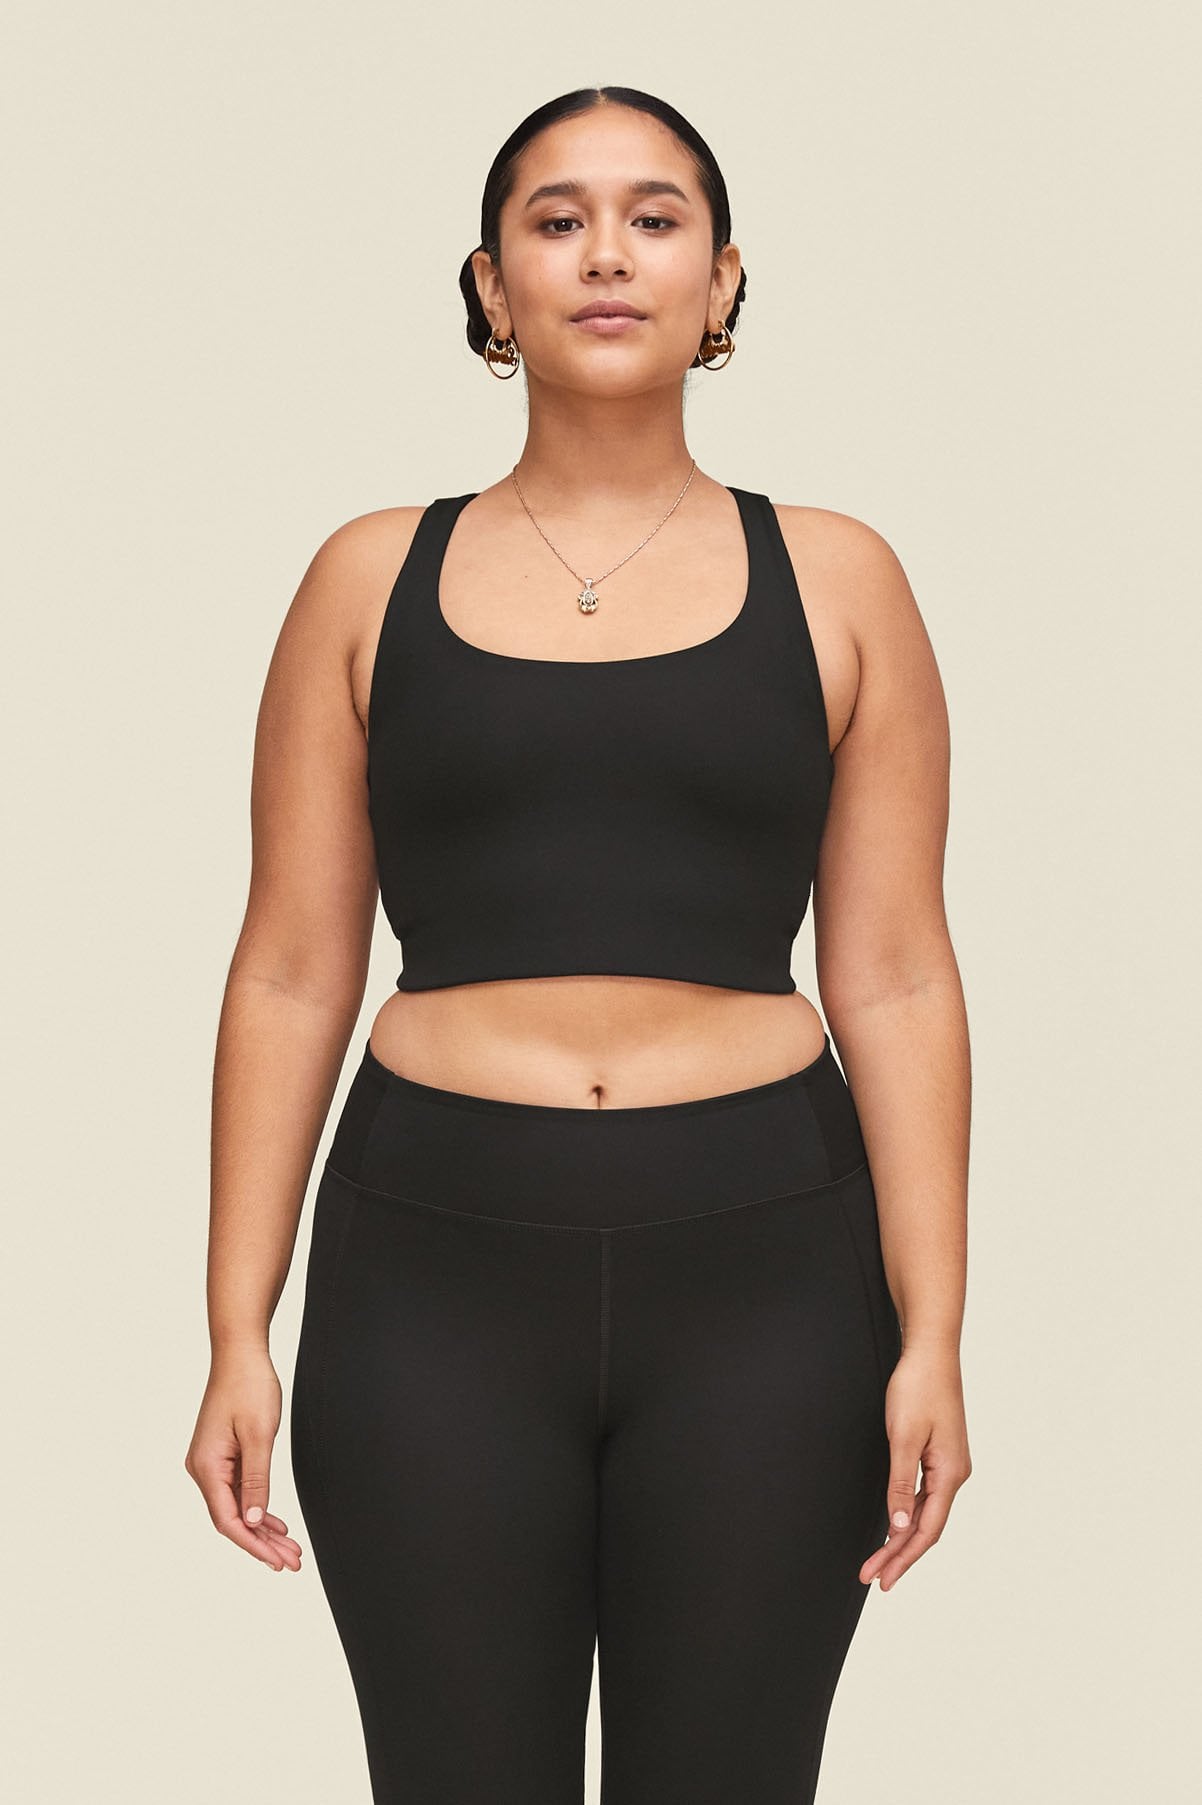 Best Low Impact Sports Bras for Big Busts 2021